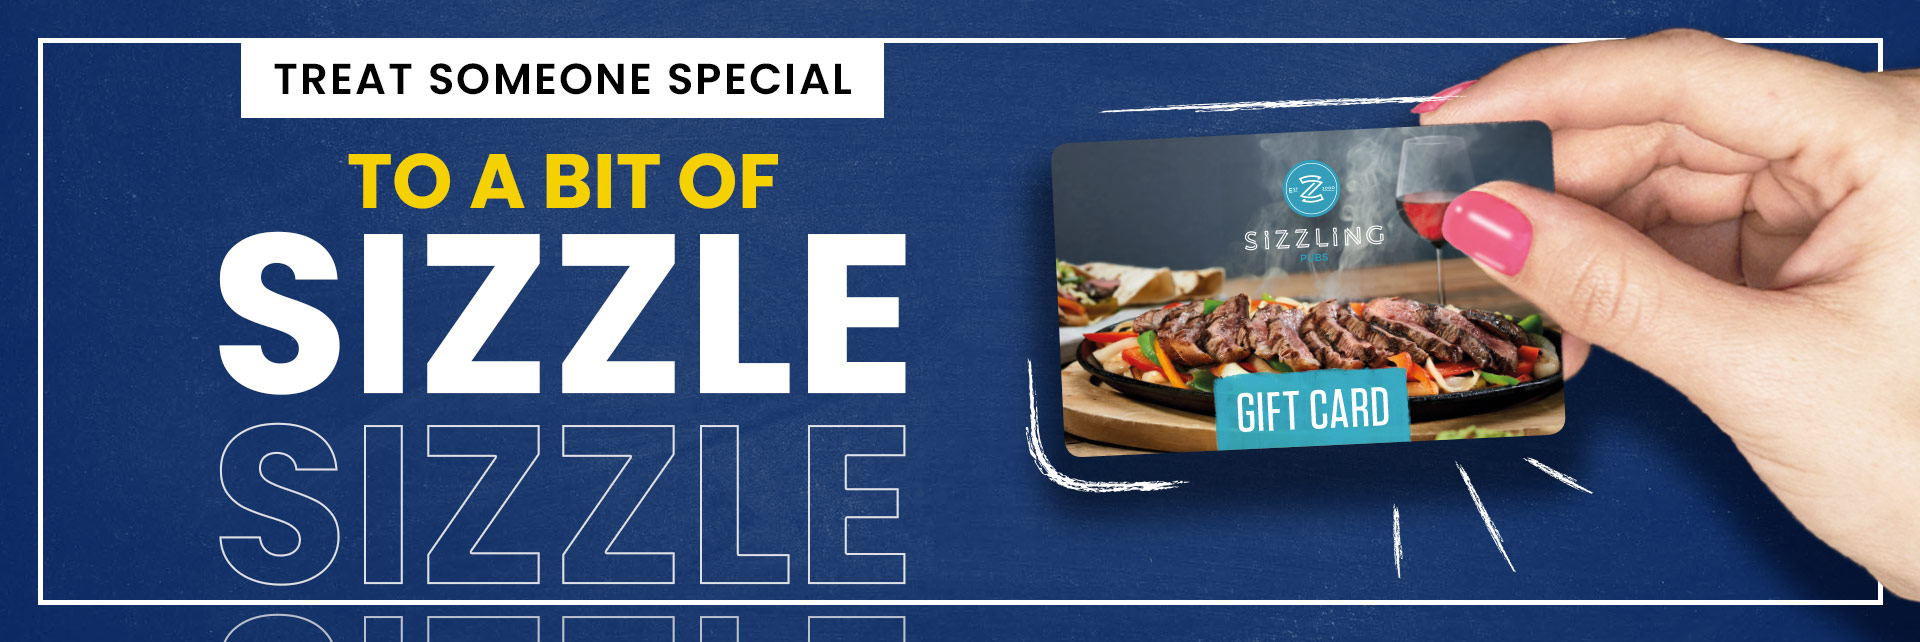 Sizzling Pubs Gift Card at The Stone House in Newport